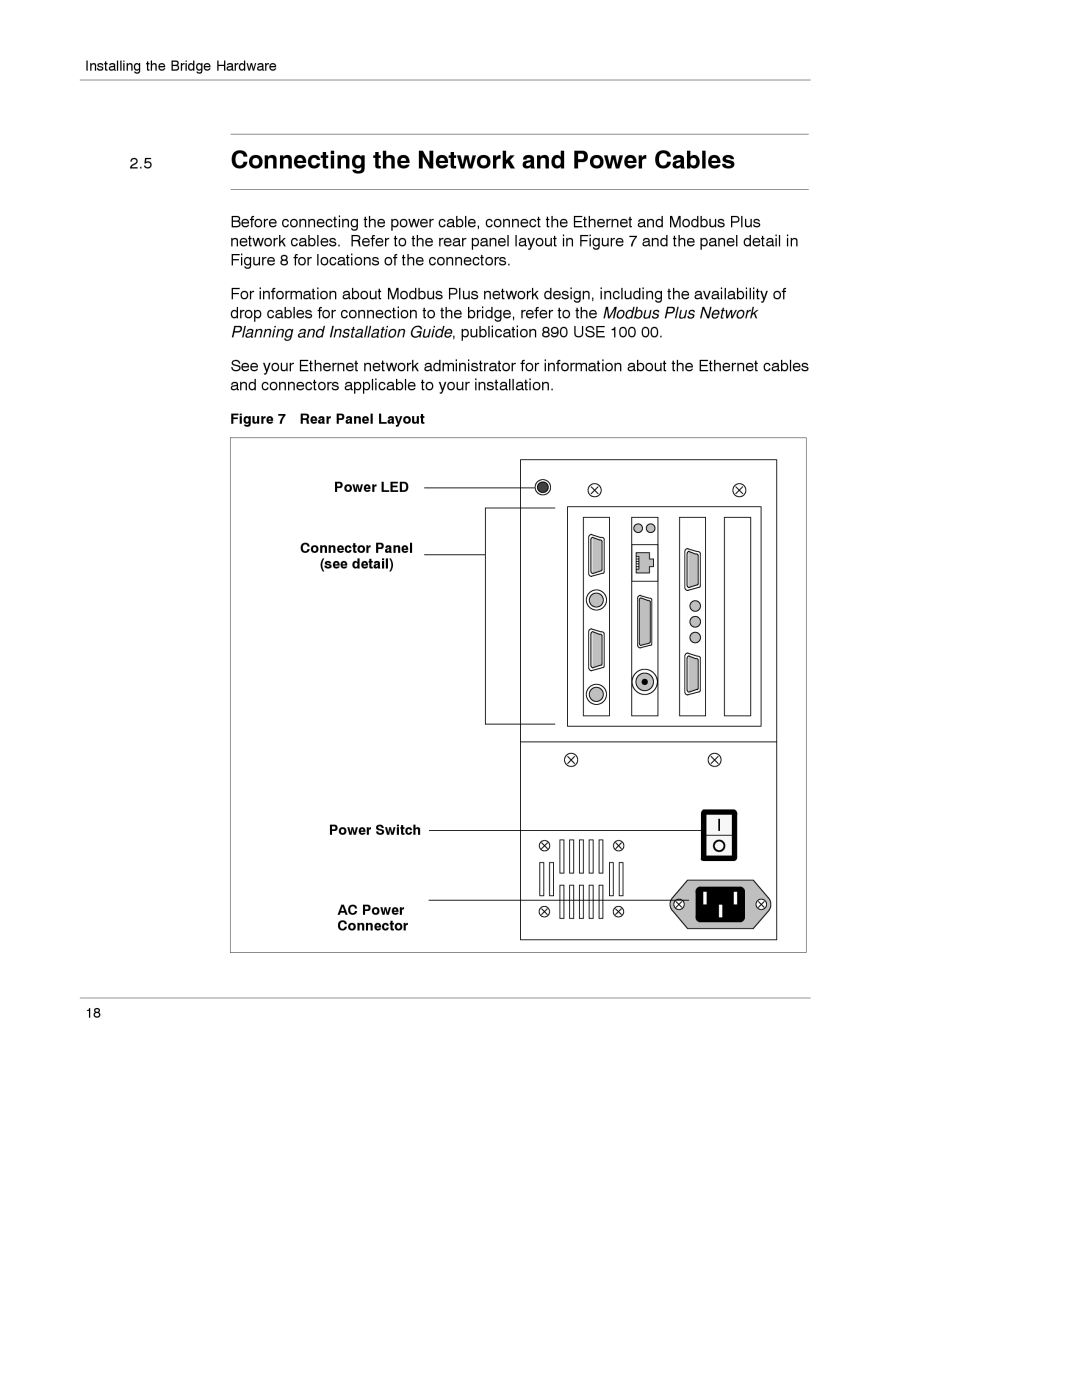 Schneider Electric 174 CEV manual Connecting the Network and Power Cables 